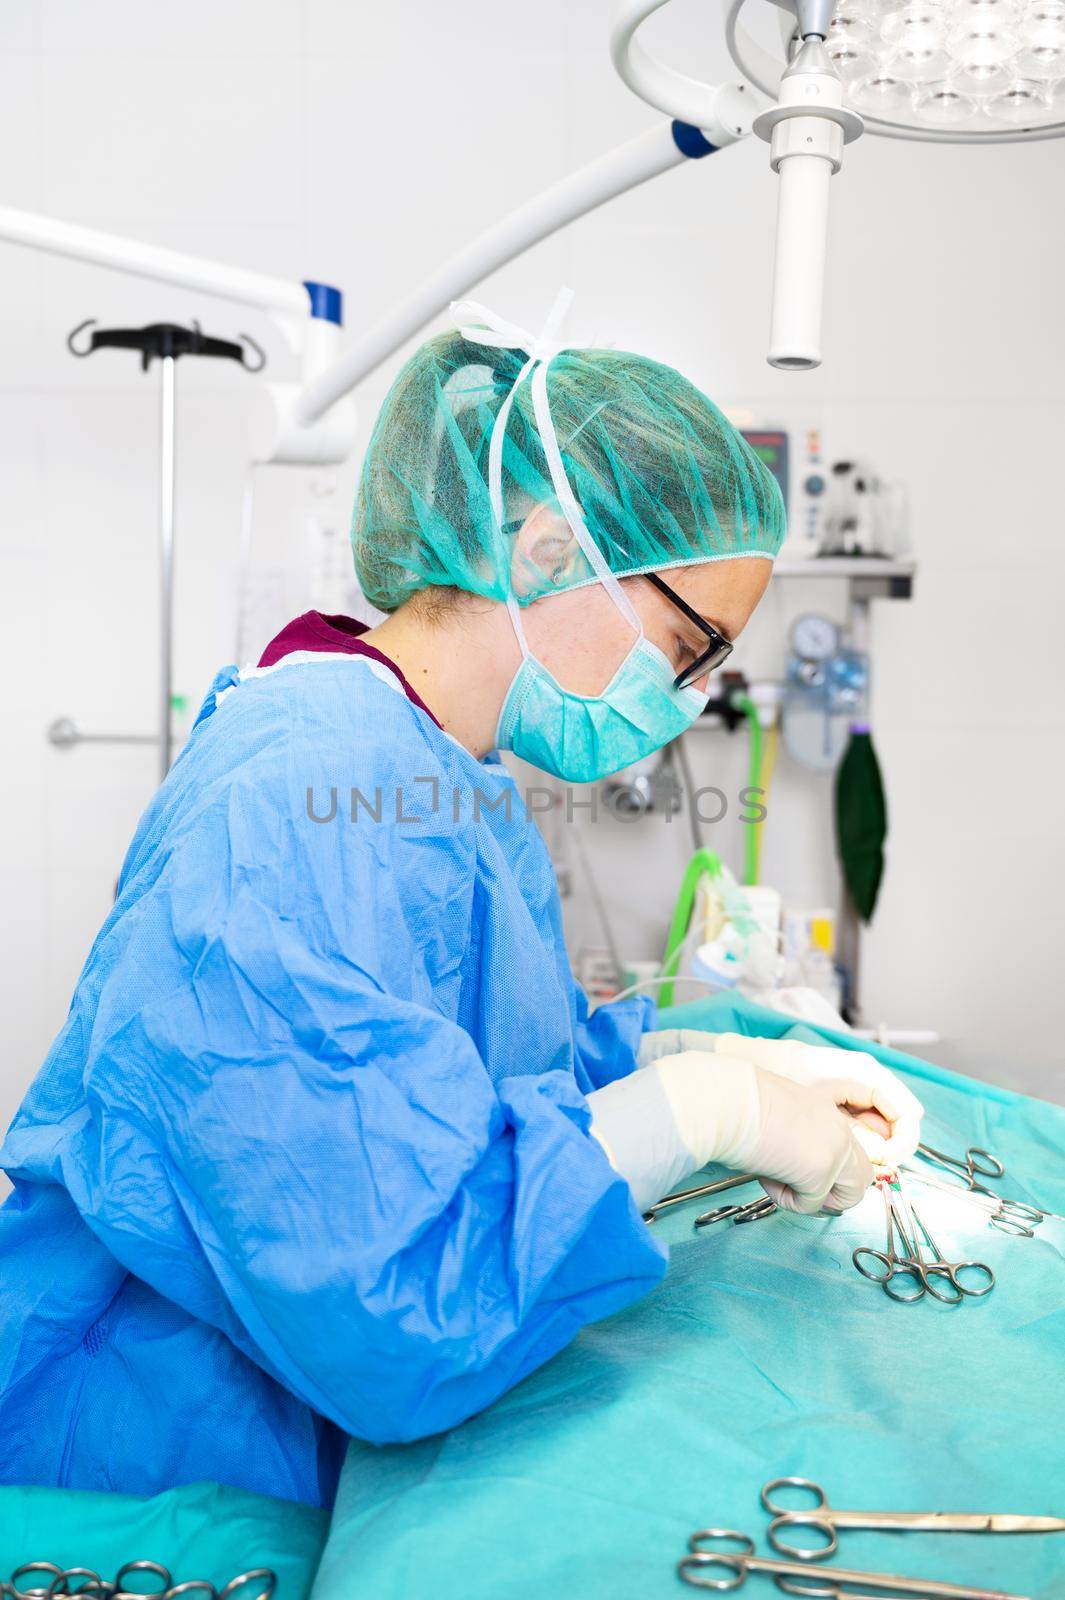 Close-up portrait of female surgeon wearing sterile clothing operating at operating room. High quality photography